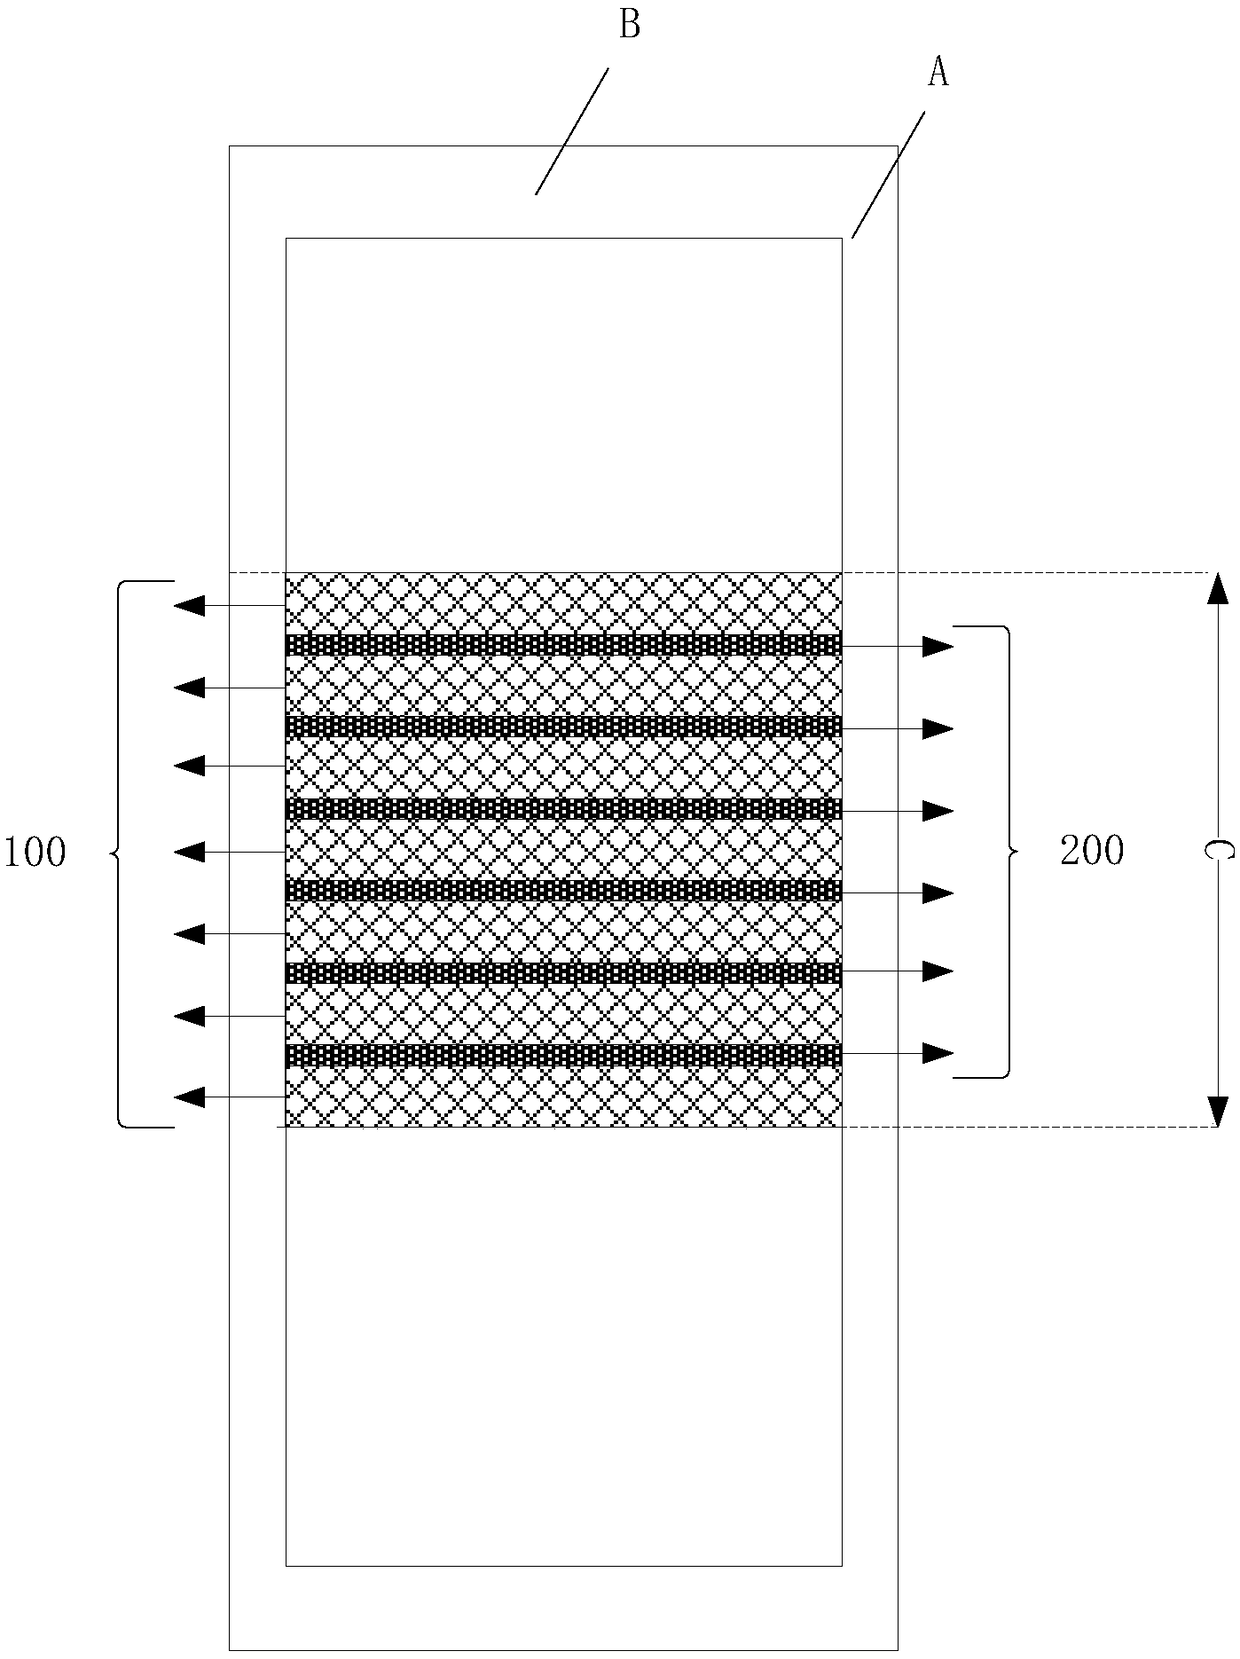 Folding screen and display device